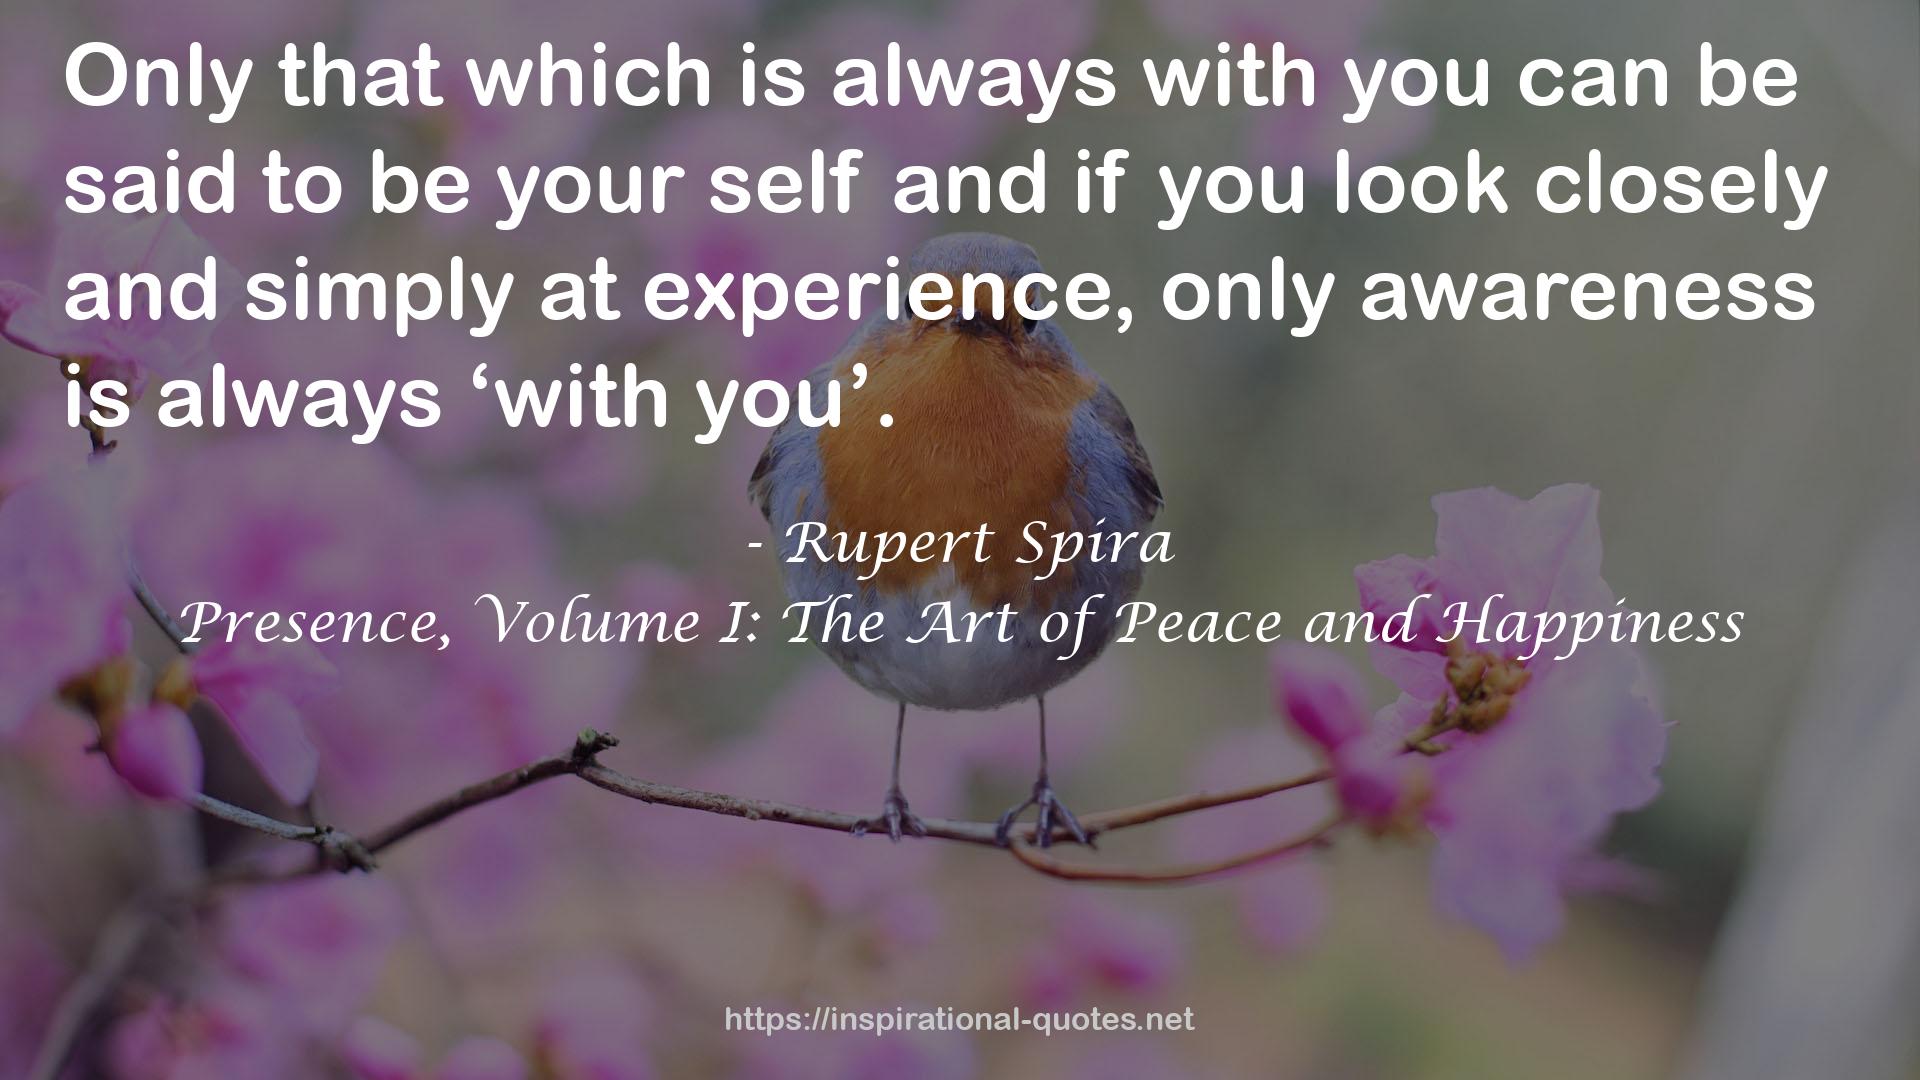 Presence, Volume I: The Art of Peace and Happiness QUOTES